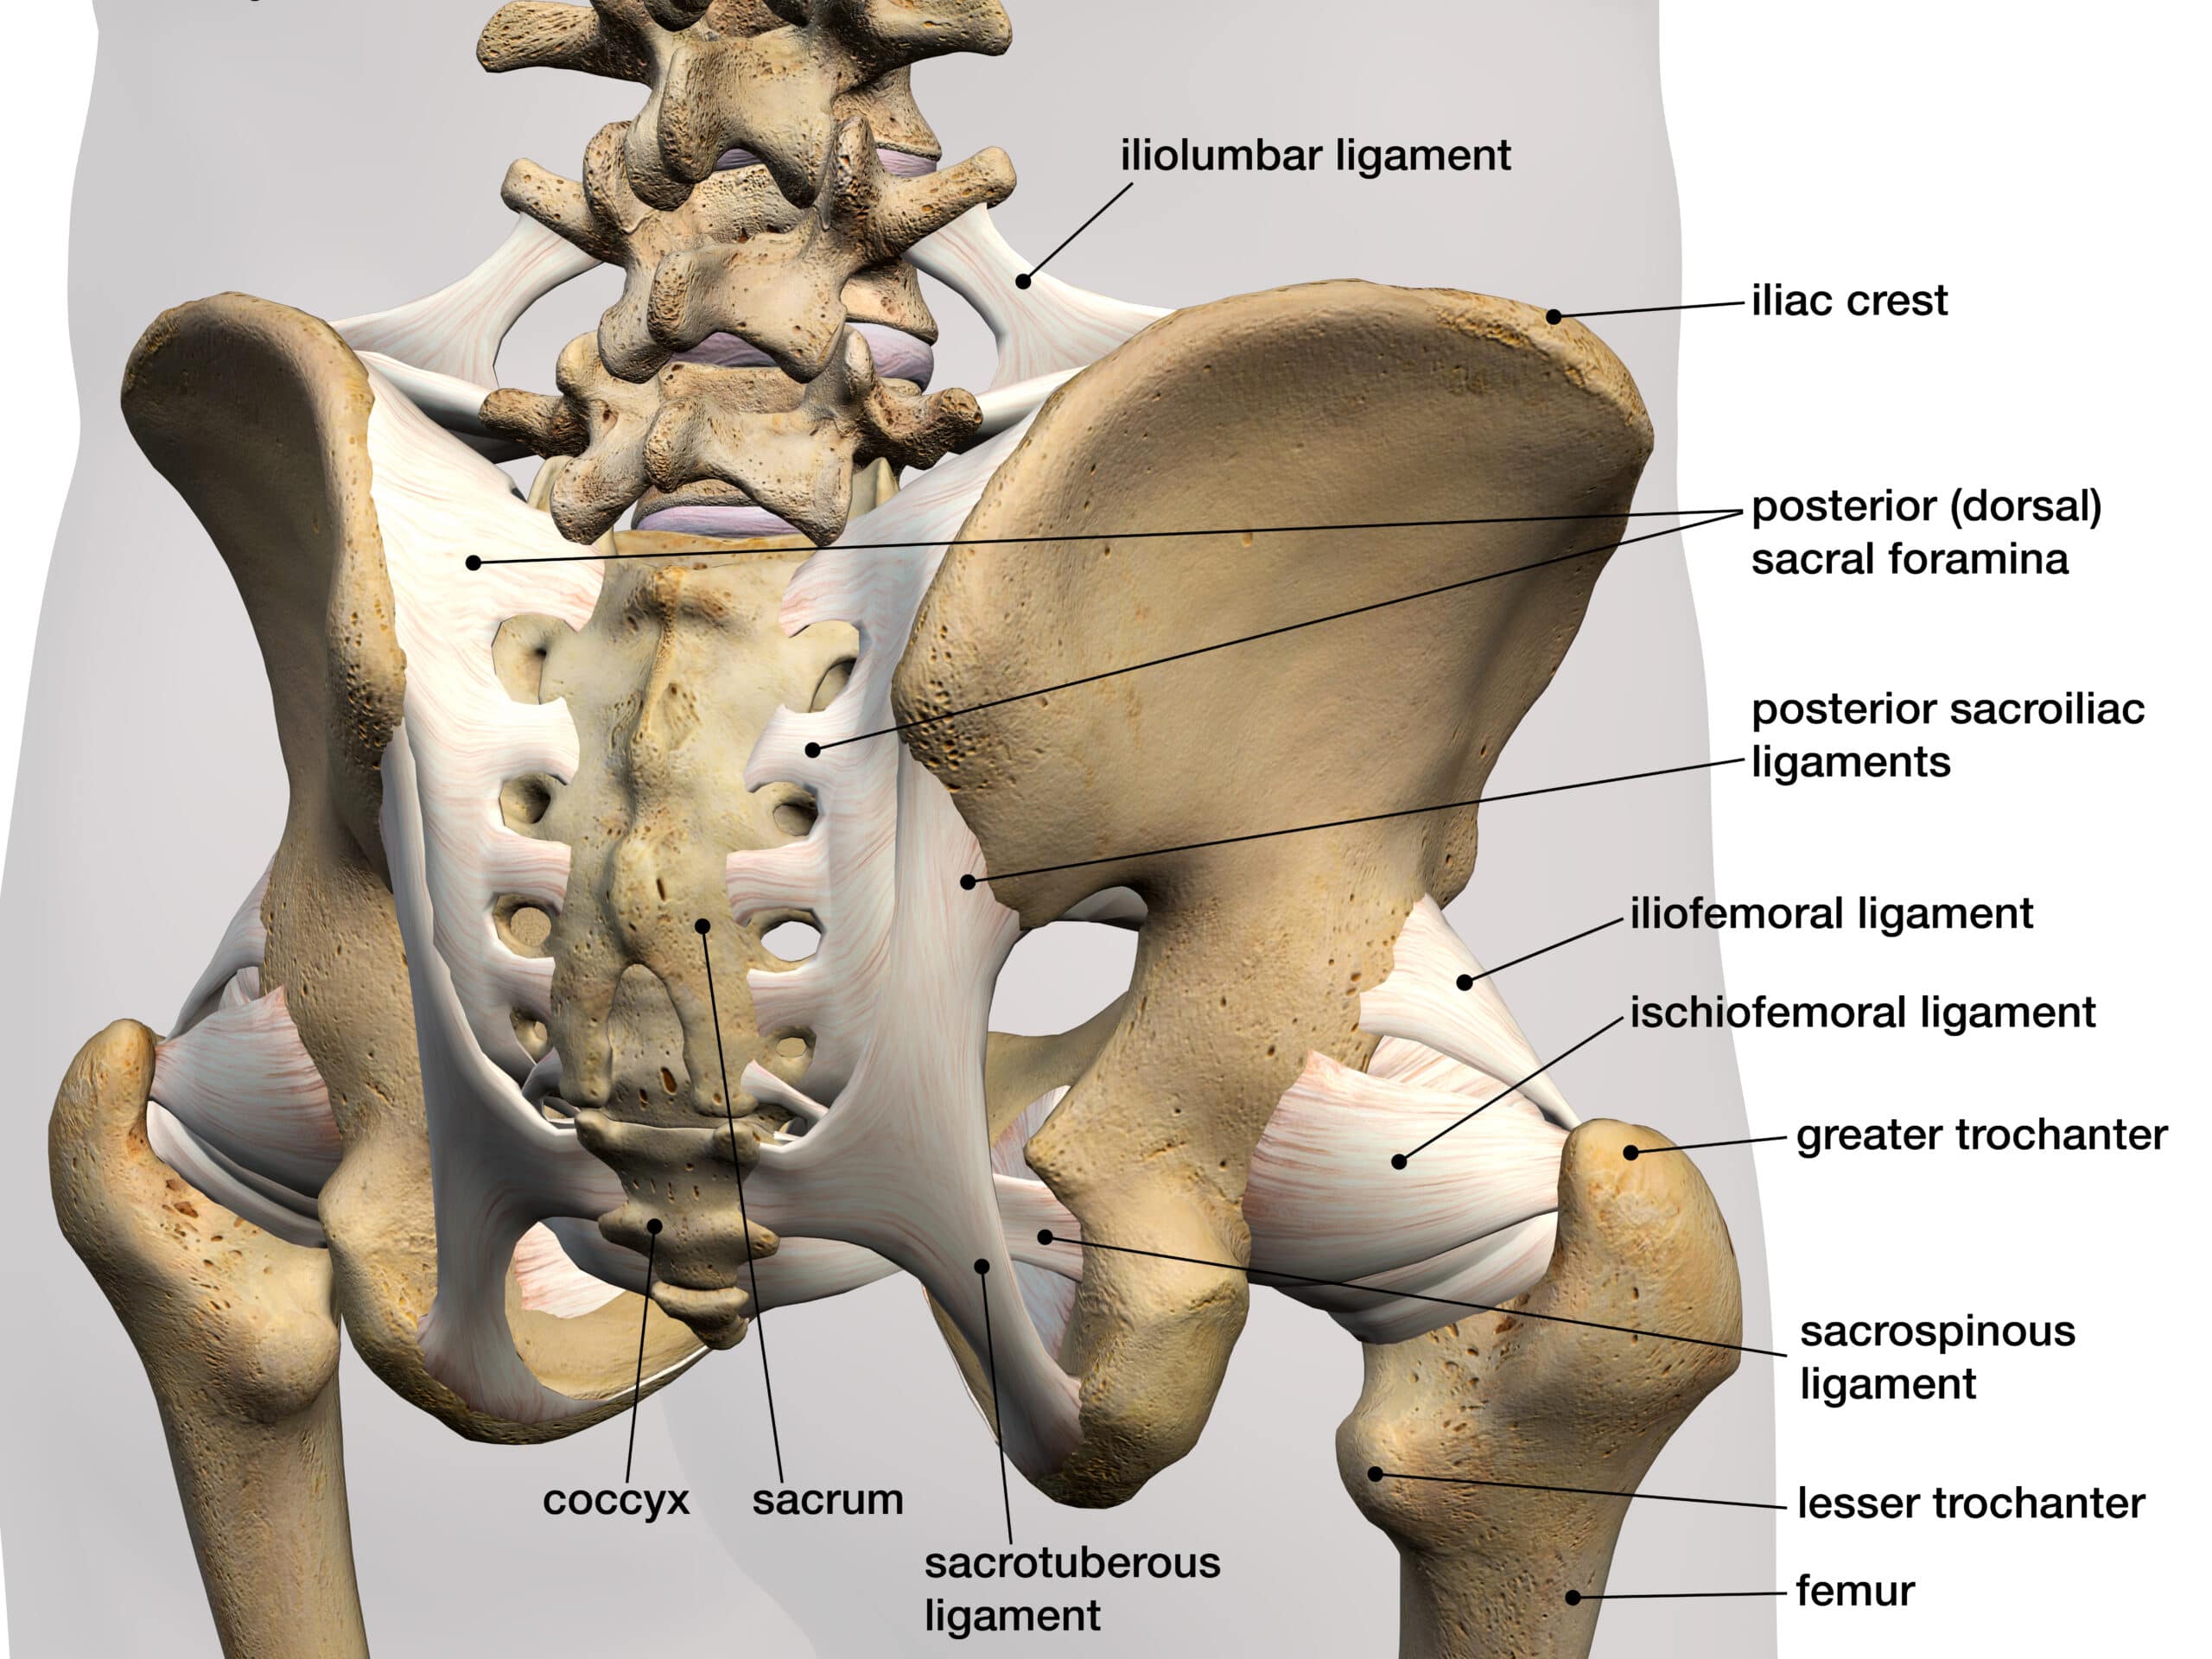 The Anatomy of the Pelvic Girdle and Pelvic Fractures